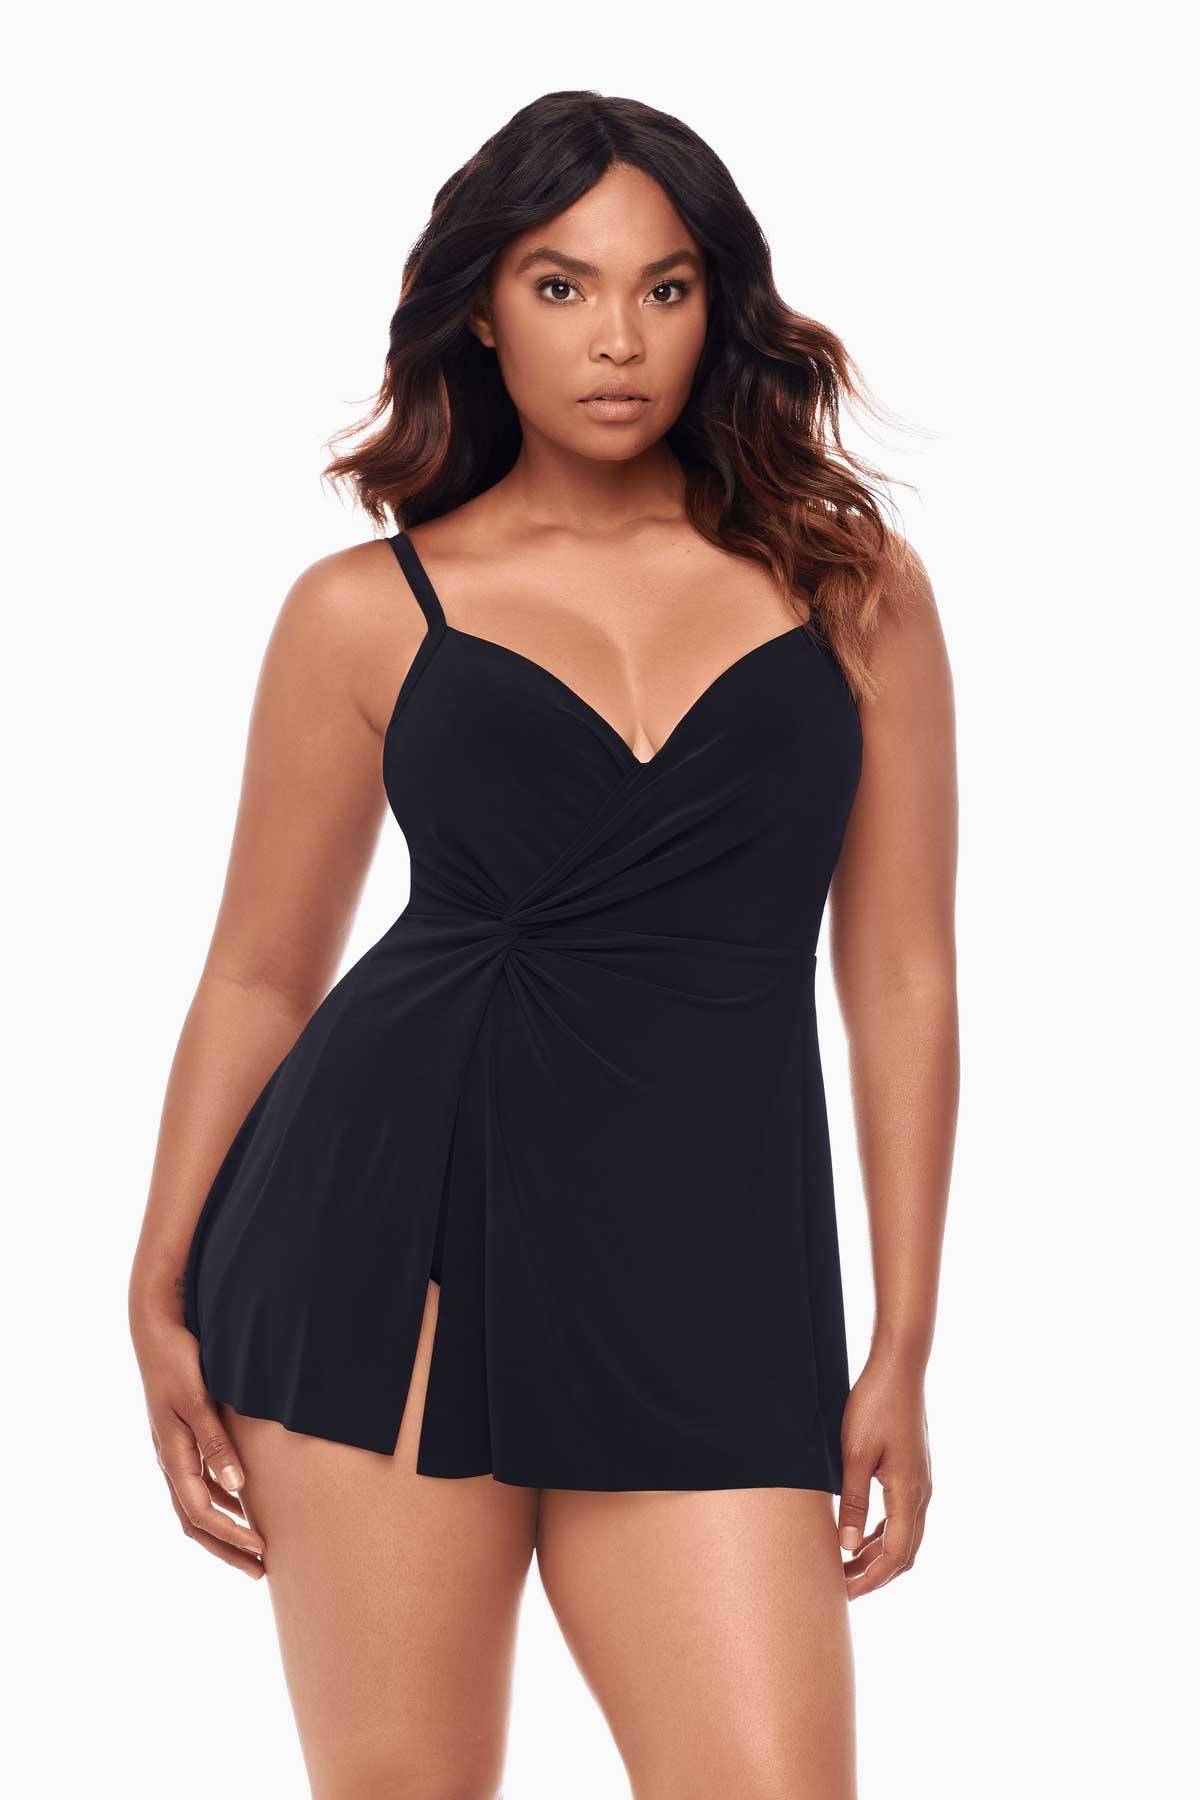 Miraclesuit® Twisted Sister Adora Skirted One-Piece Swimsuit